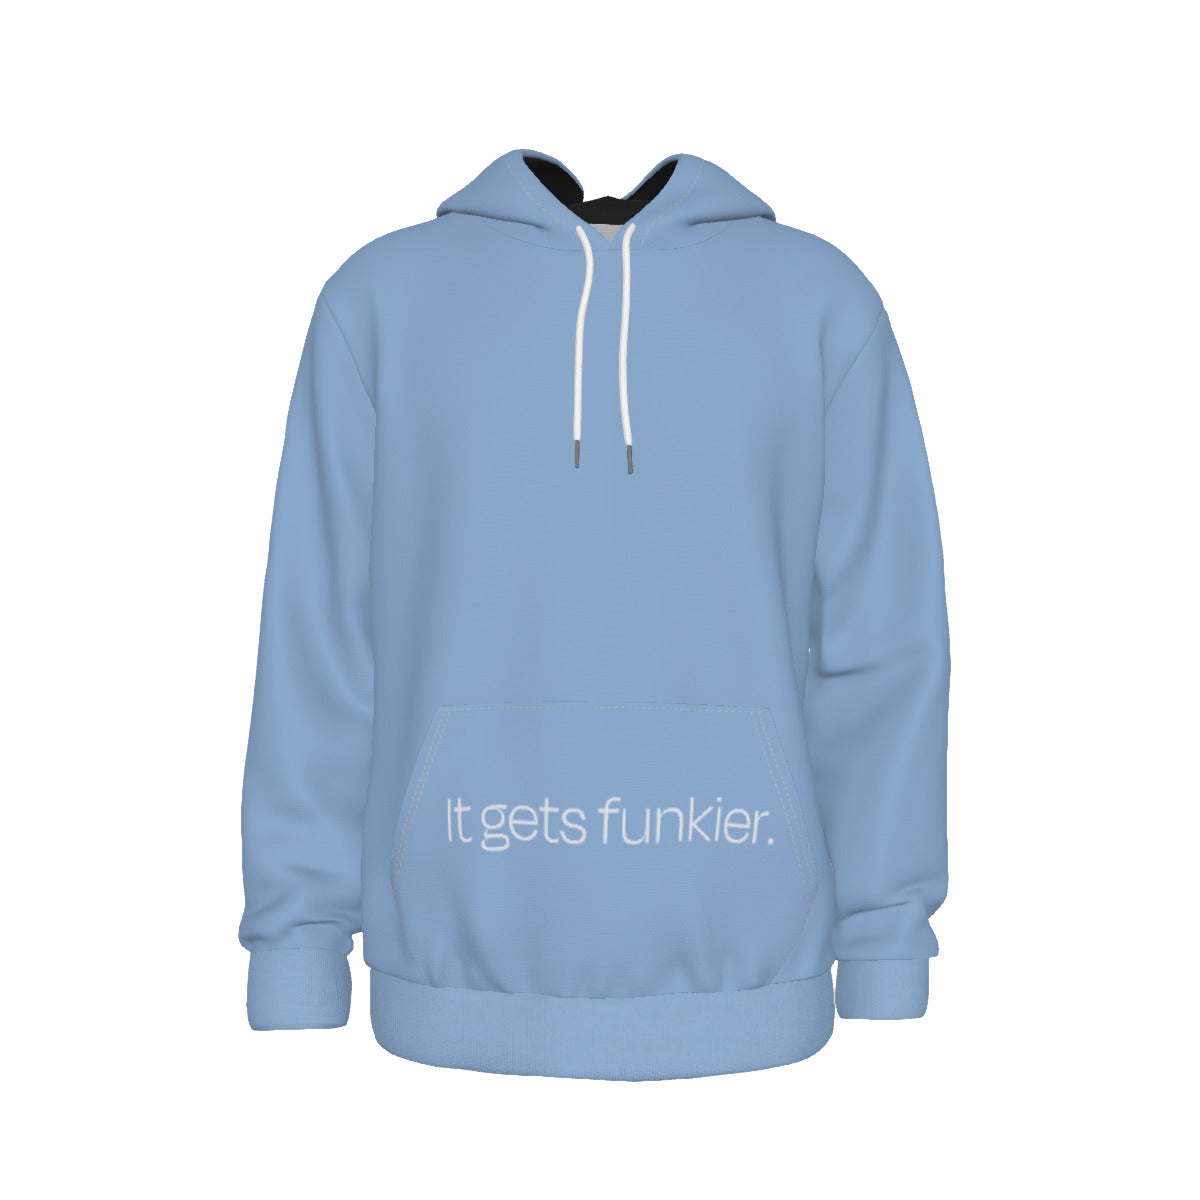 Vulfpeck VOSM Collection - It Gets Funkier Men's Thicken Pullover Hoodie